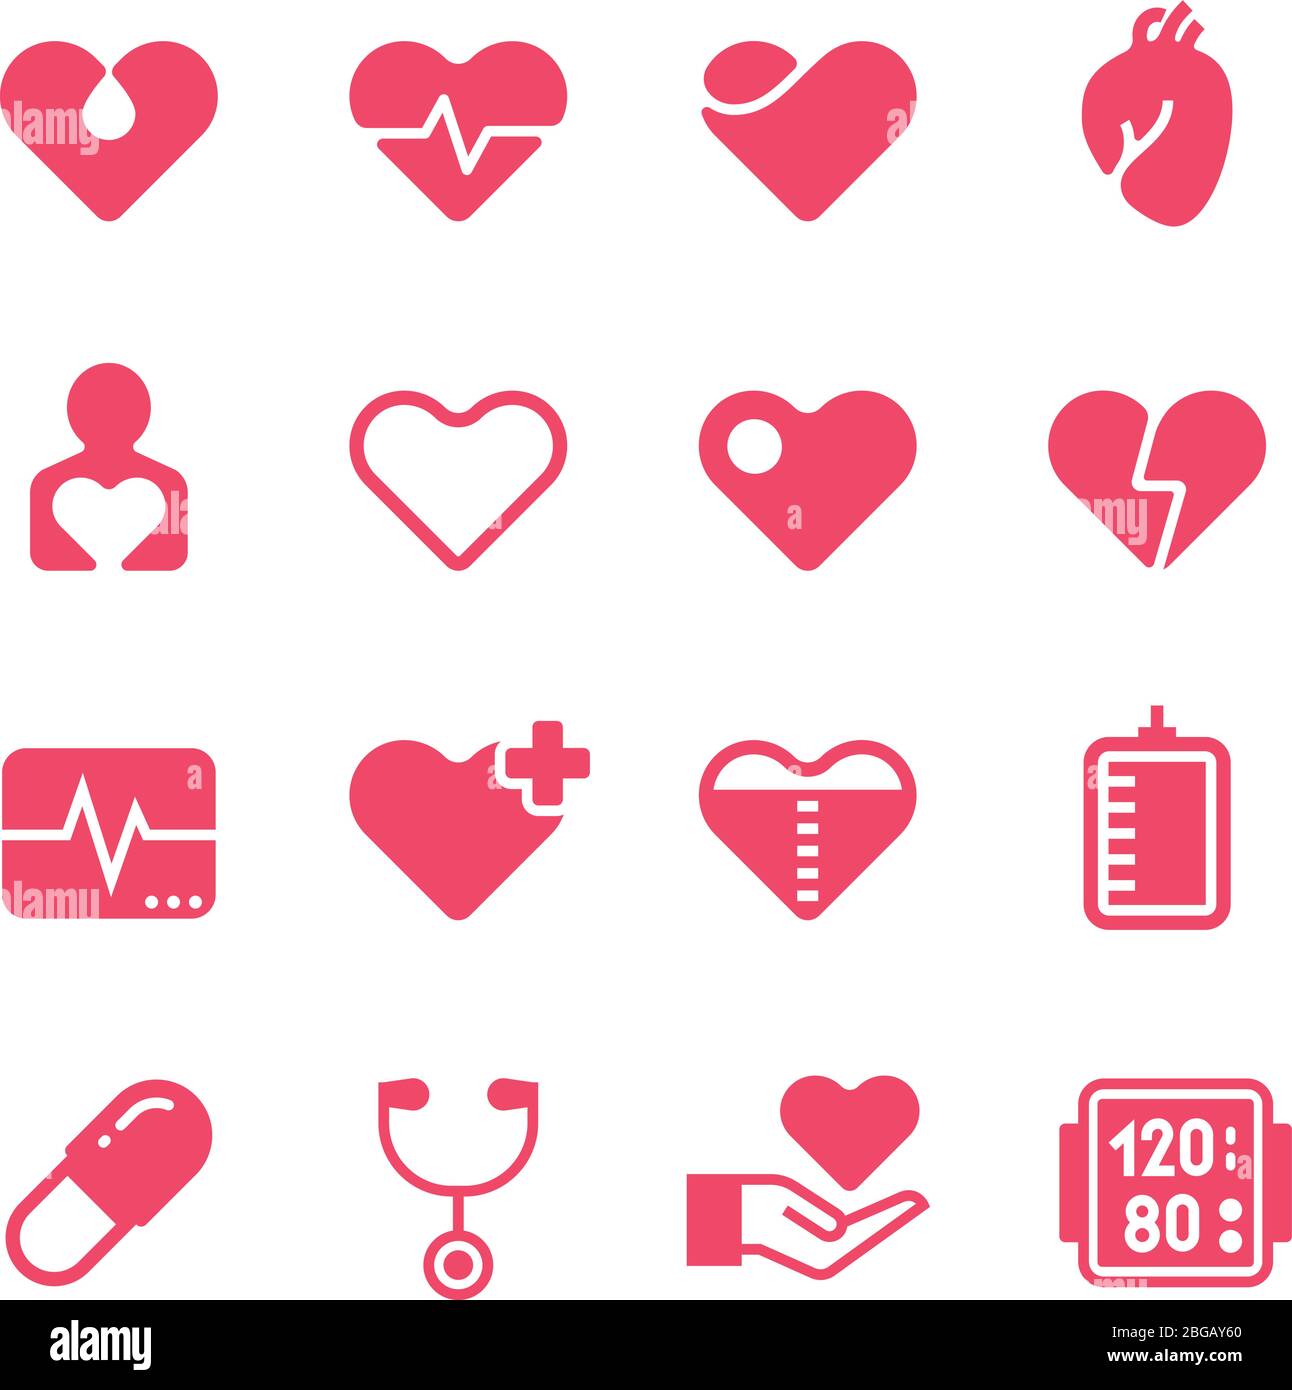 Heart diagnosis and cardiac treatment vector icons. Cardiology red silhouette pictograms. Medicine diagnosis health, cardiology sign collection illustration Stock Vector